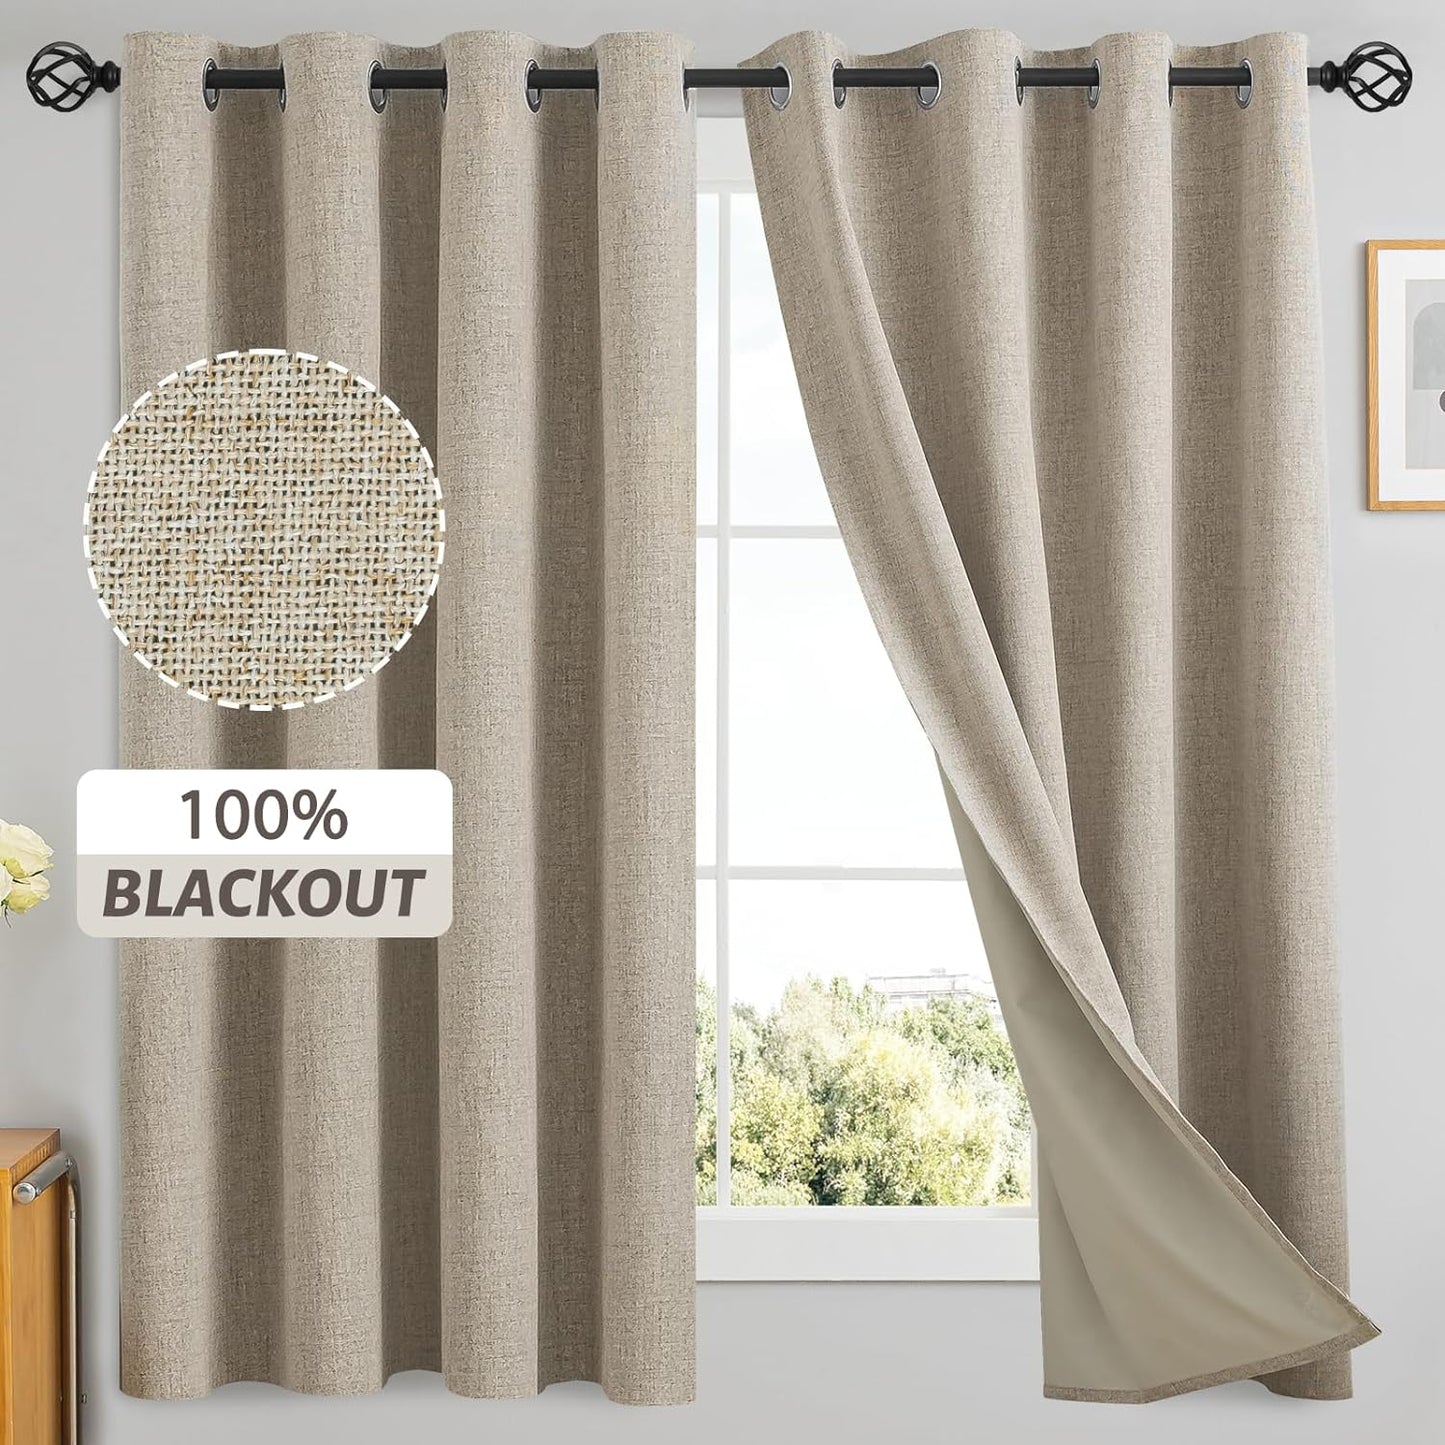 Yakamok Natural Linen Curtains 100% Blackout 84 Inches Long,Room Darkening Textured Curtains for Living Room Thermal Grommet Bedroom Curtains 2 Panels with Greyish White Liner  Yakamok Natural Linen 52W X 63L / 2 Panels 